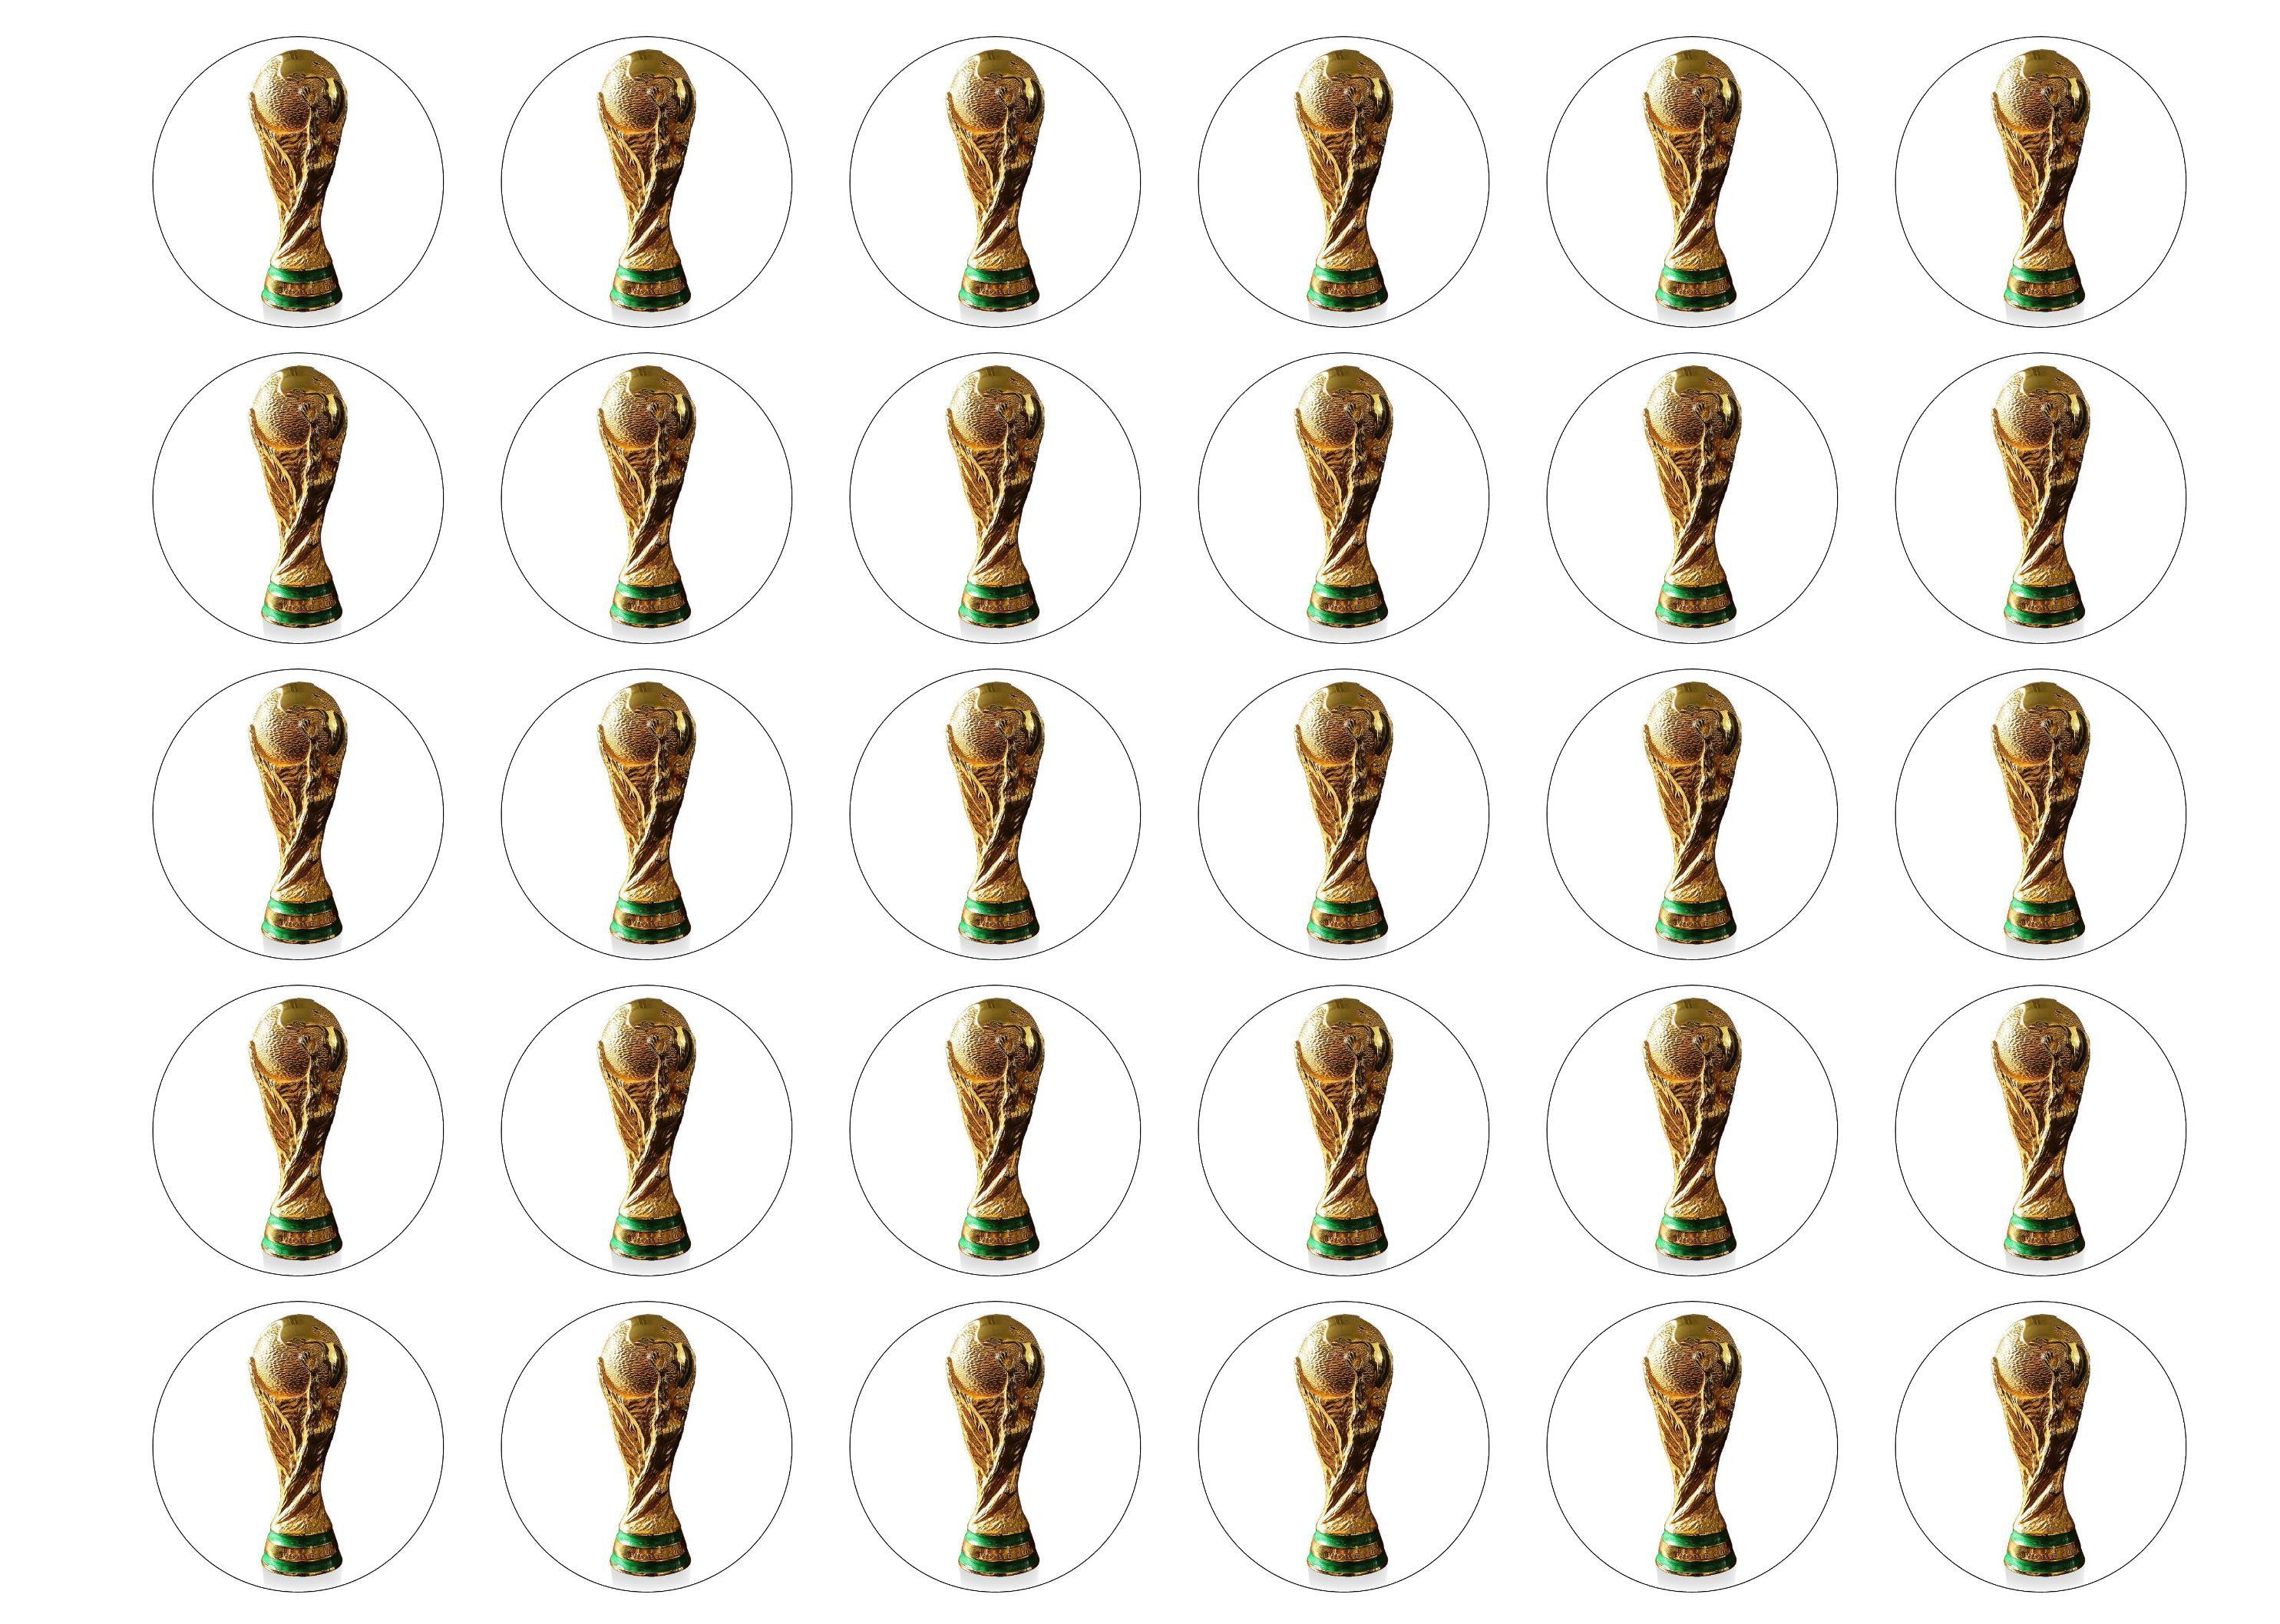 30 edible cupcake toppers with a picture of the FIFA World Cup Trophy